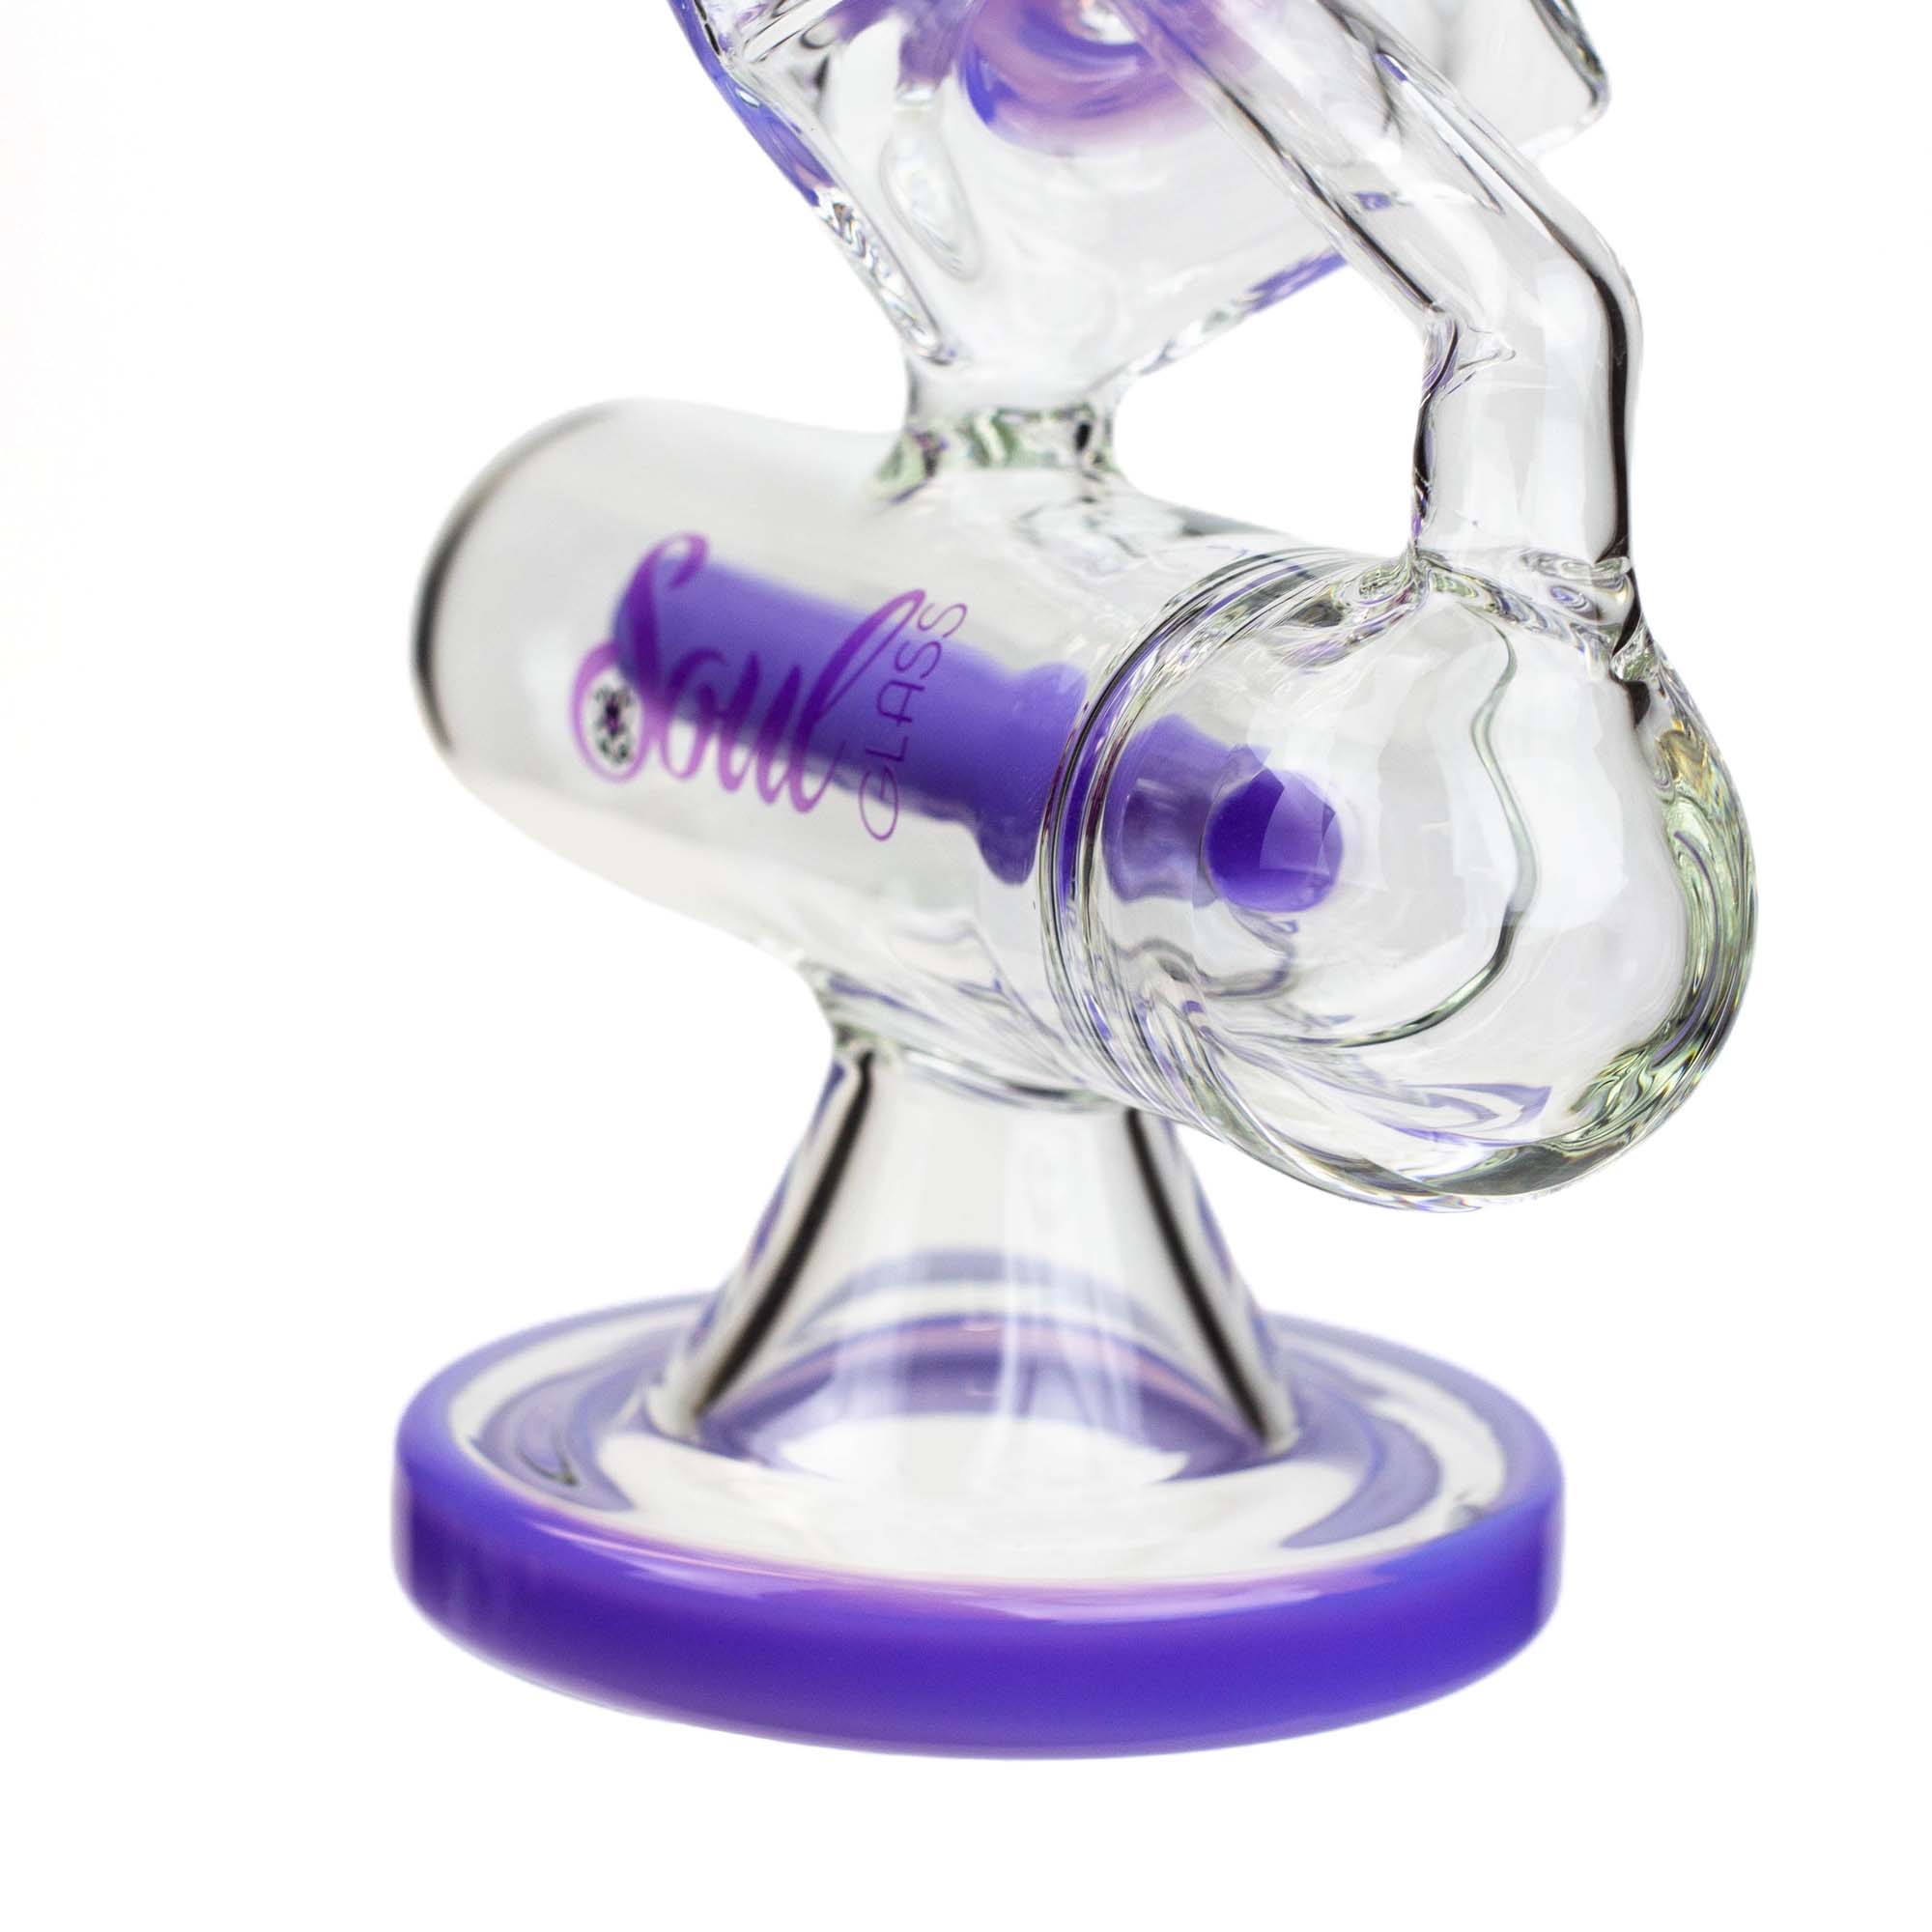 9&quot; SOUL Glass 2-in-1 Water Bong